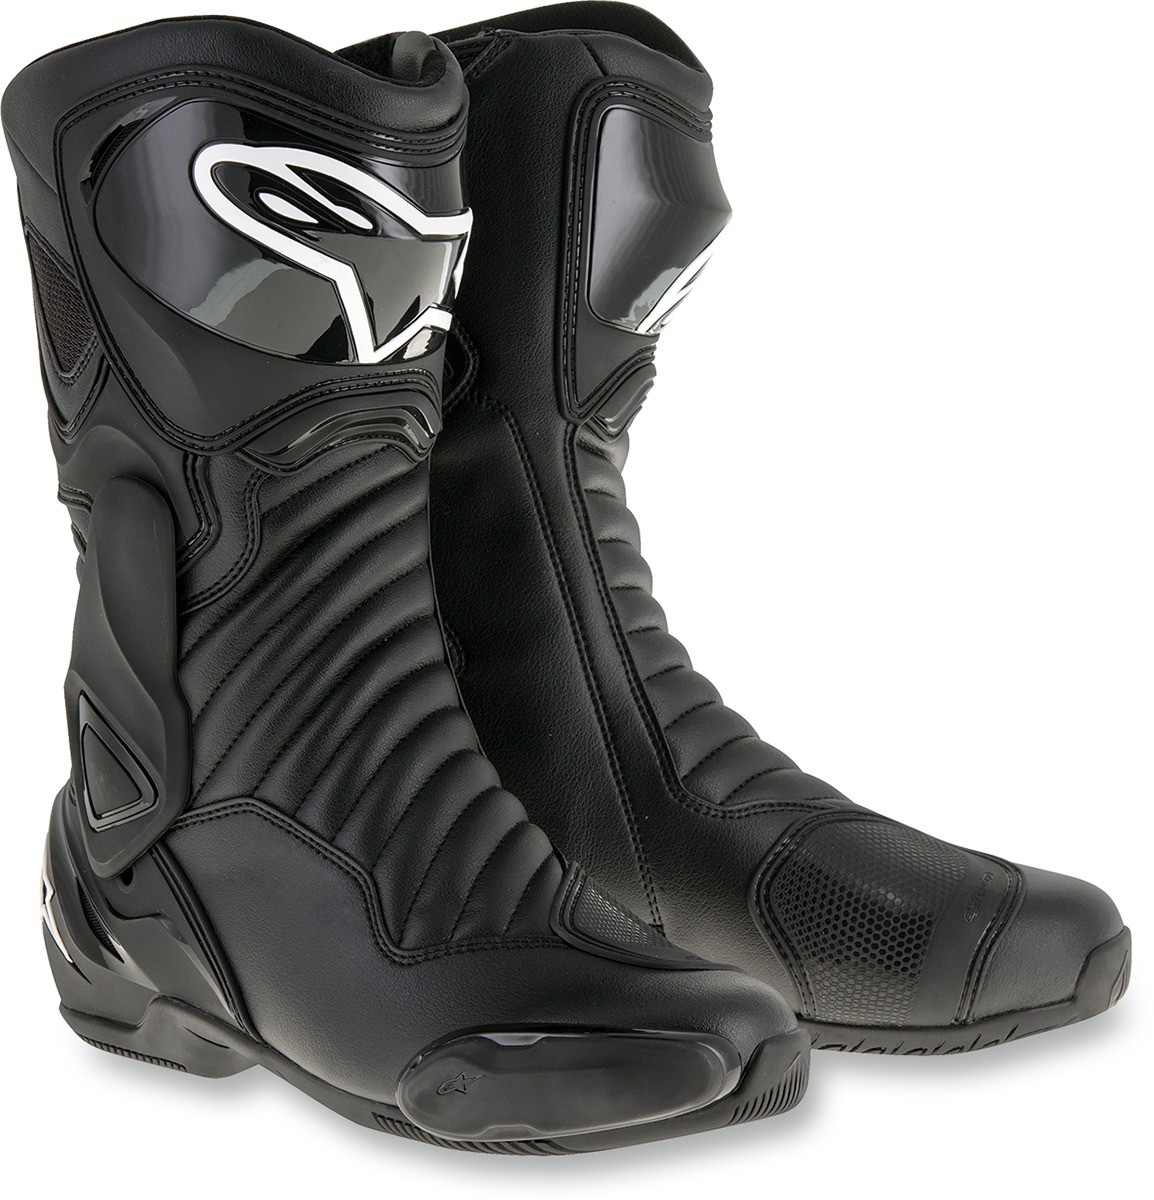 SMX-6 V2 Street Riding Boots Black US 4 - Click Image to Close